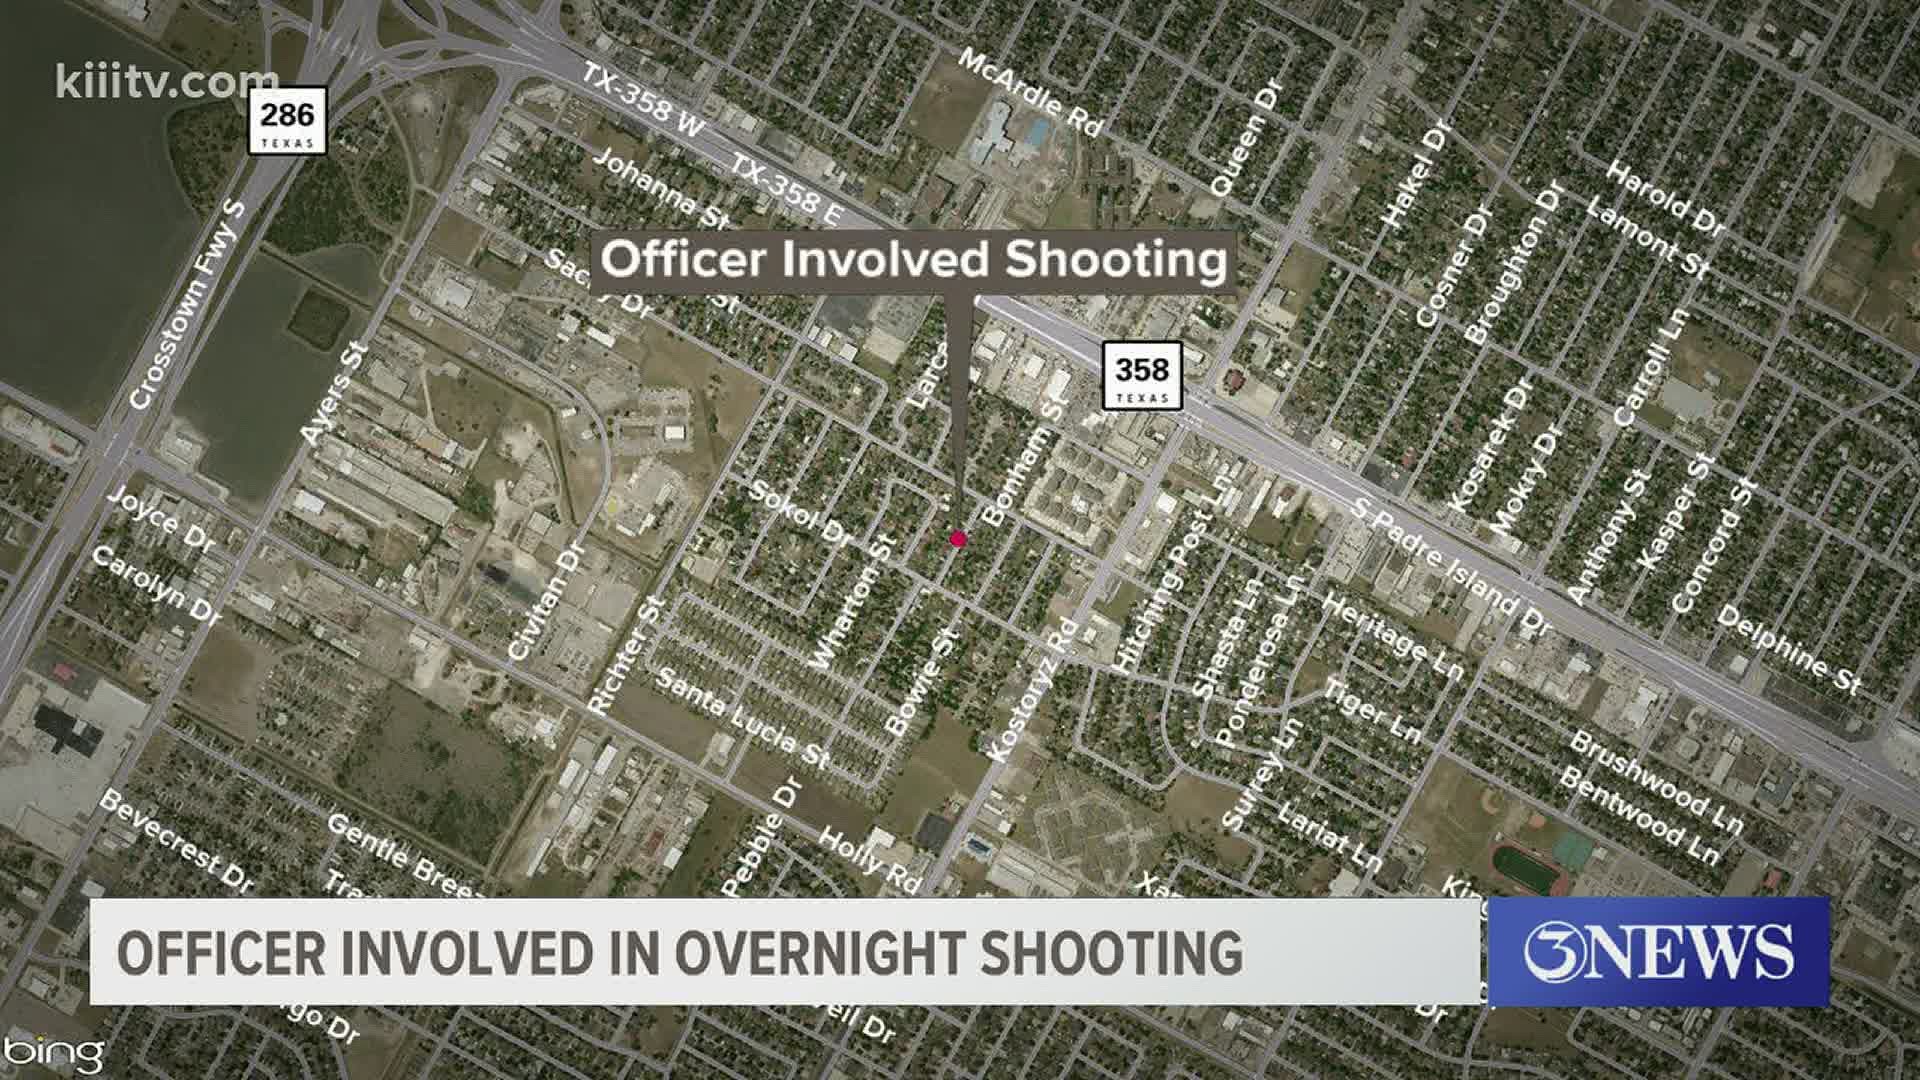 The suspect fired a shot at officers, and one officer returned fire, hitting the suspect